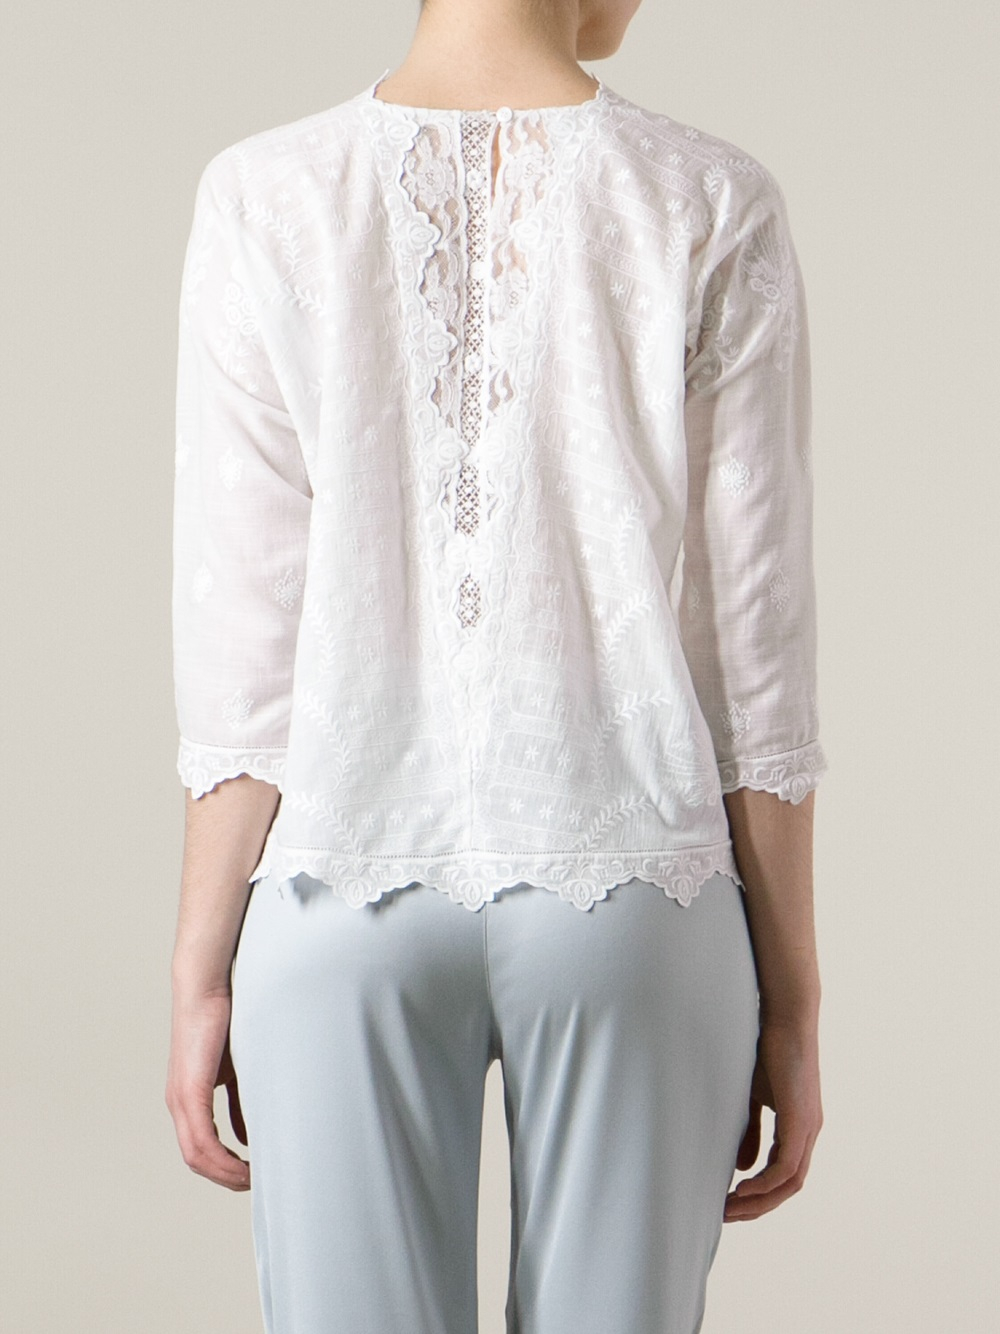 Vanessa Bruno Albane Embroidered Blouse in White | Lyst